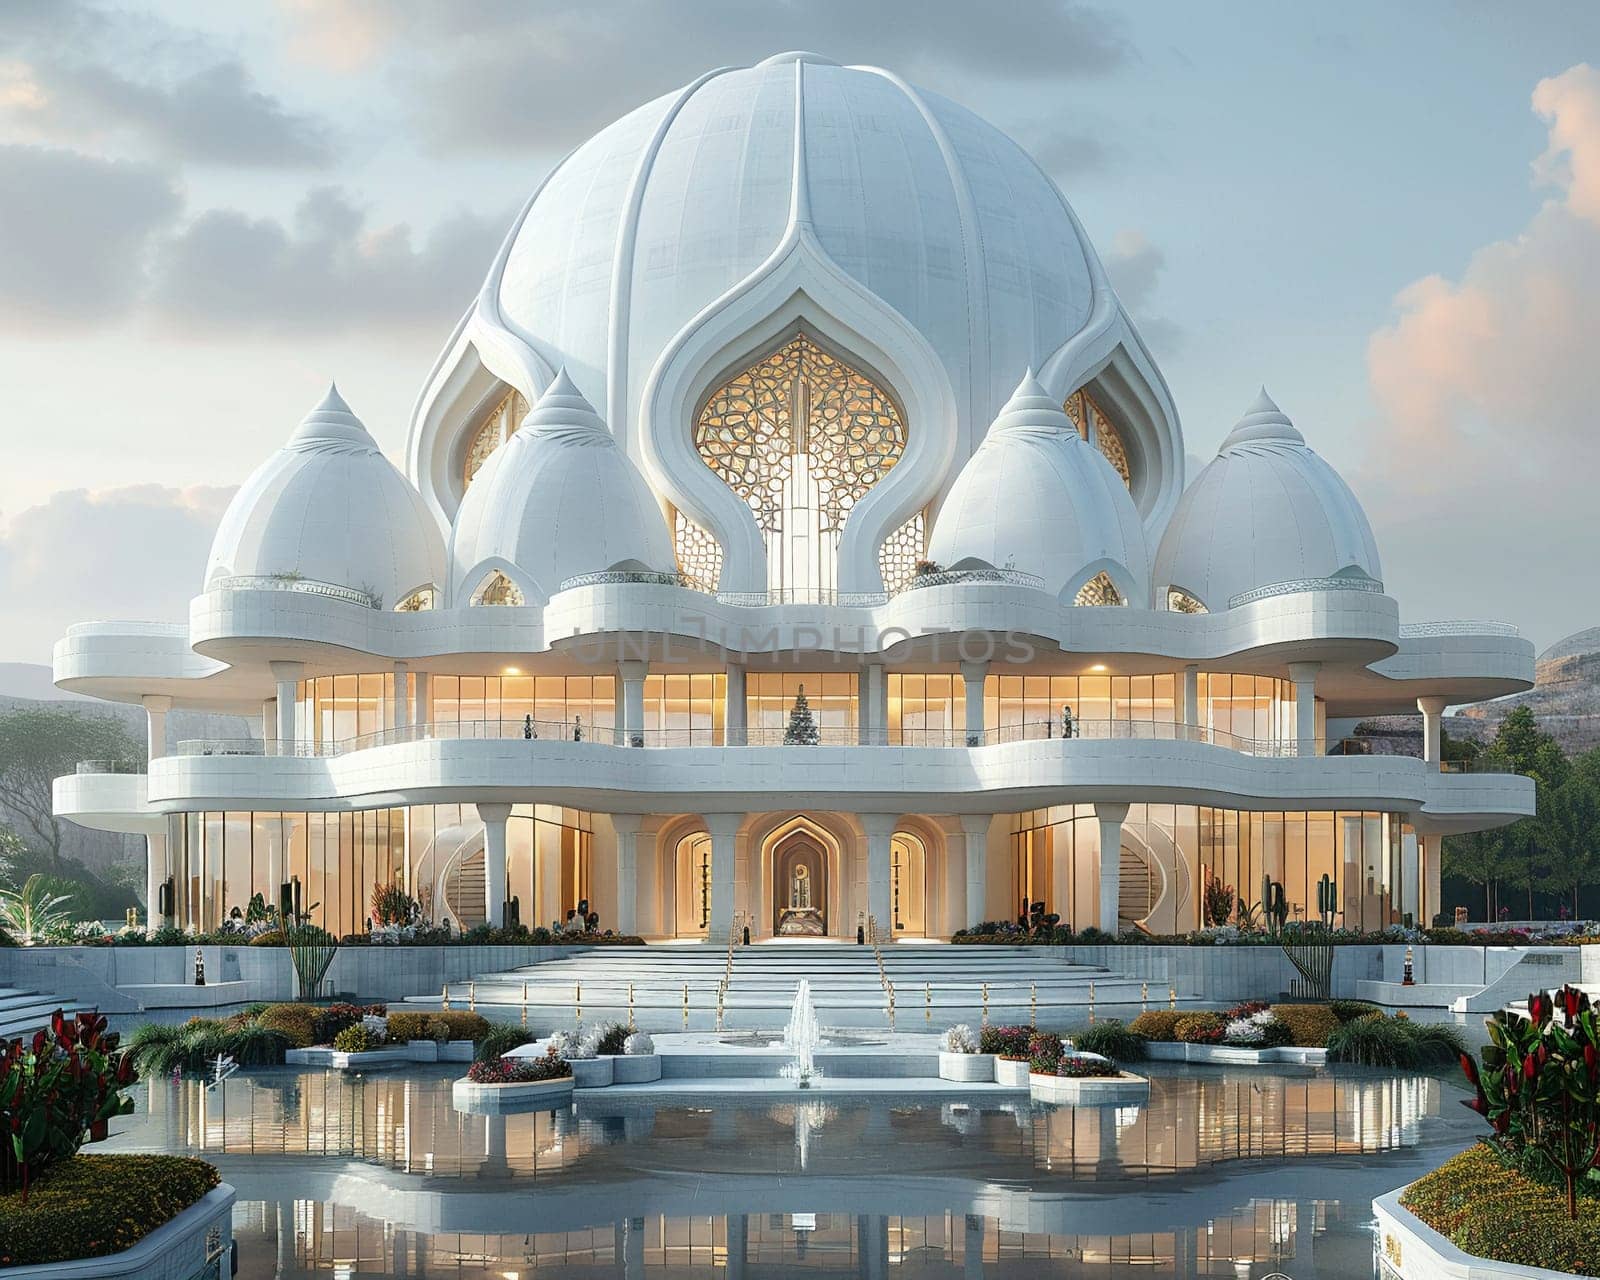 Baha'i House of Worship Dome Rising into Soft Skies, The temple's form blurs upward, inviting all to unity and prayer.